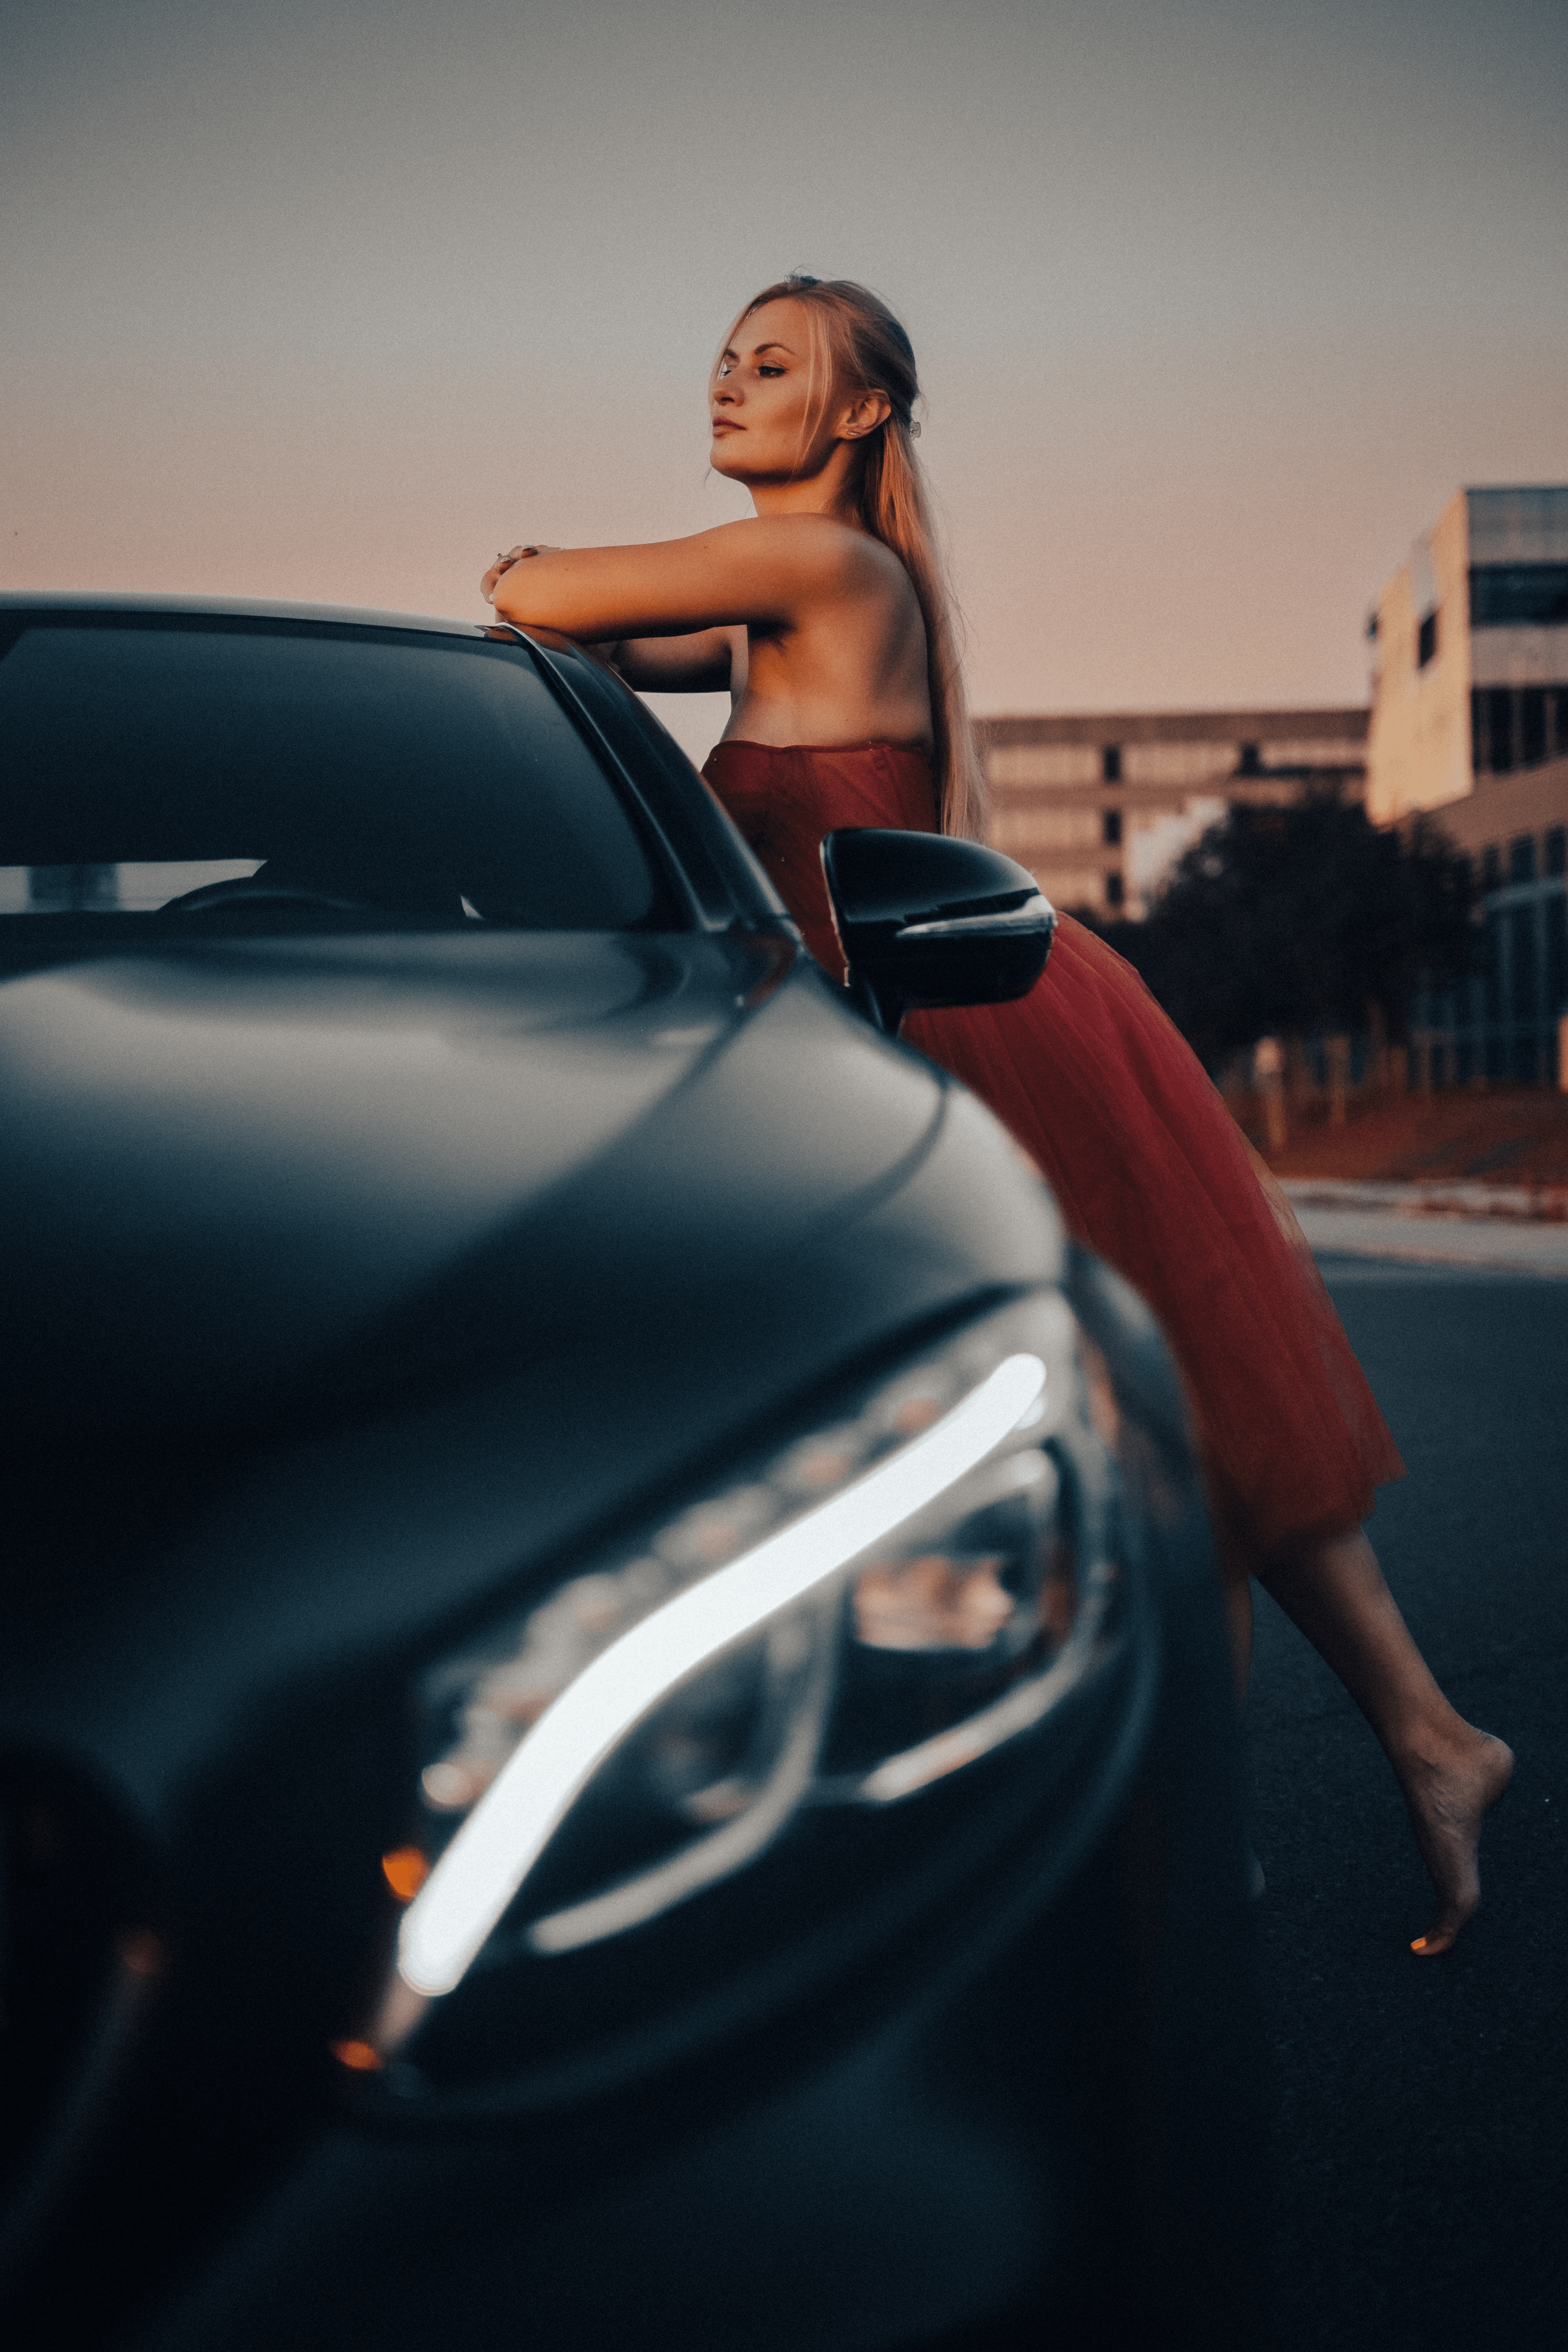 Evening Light in a Red Dress with Mercedes S Class